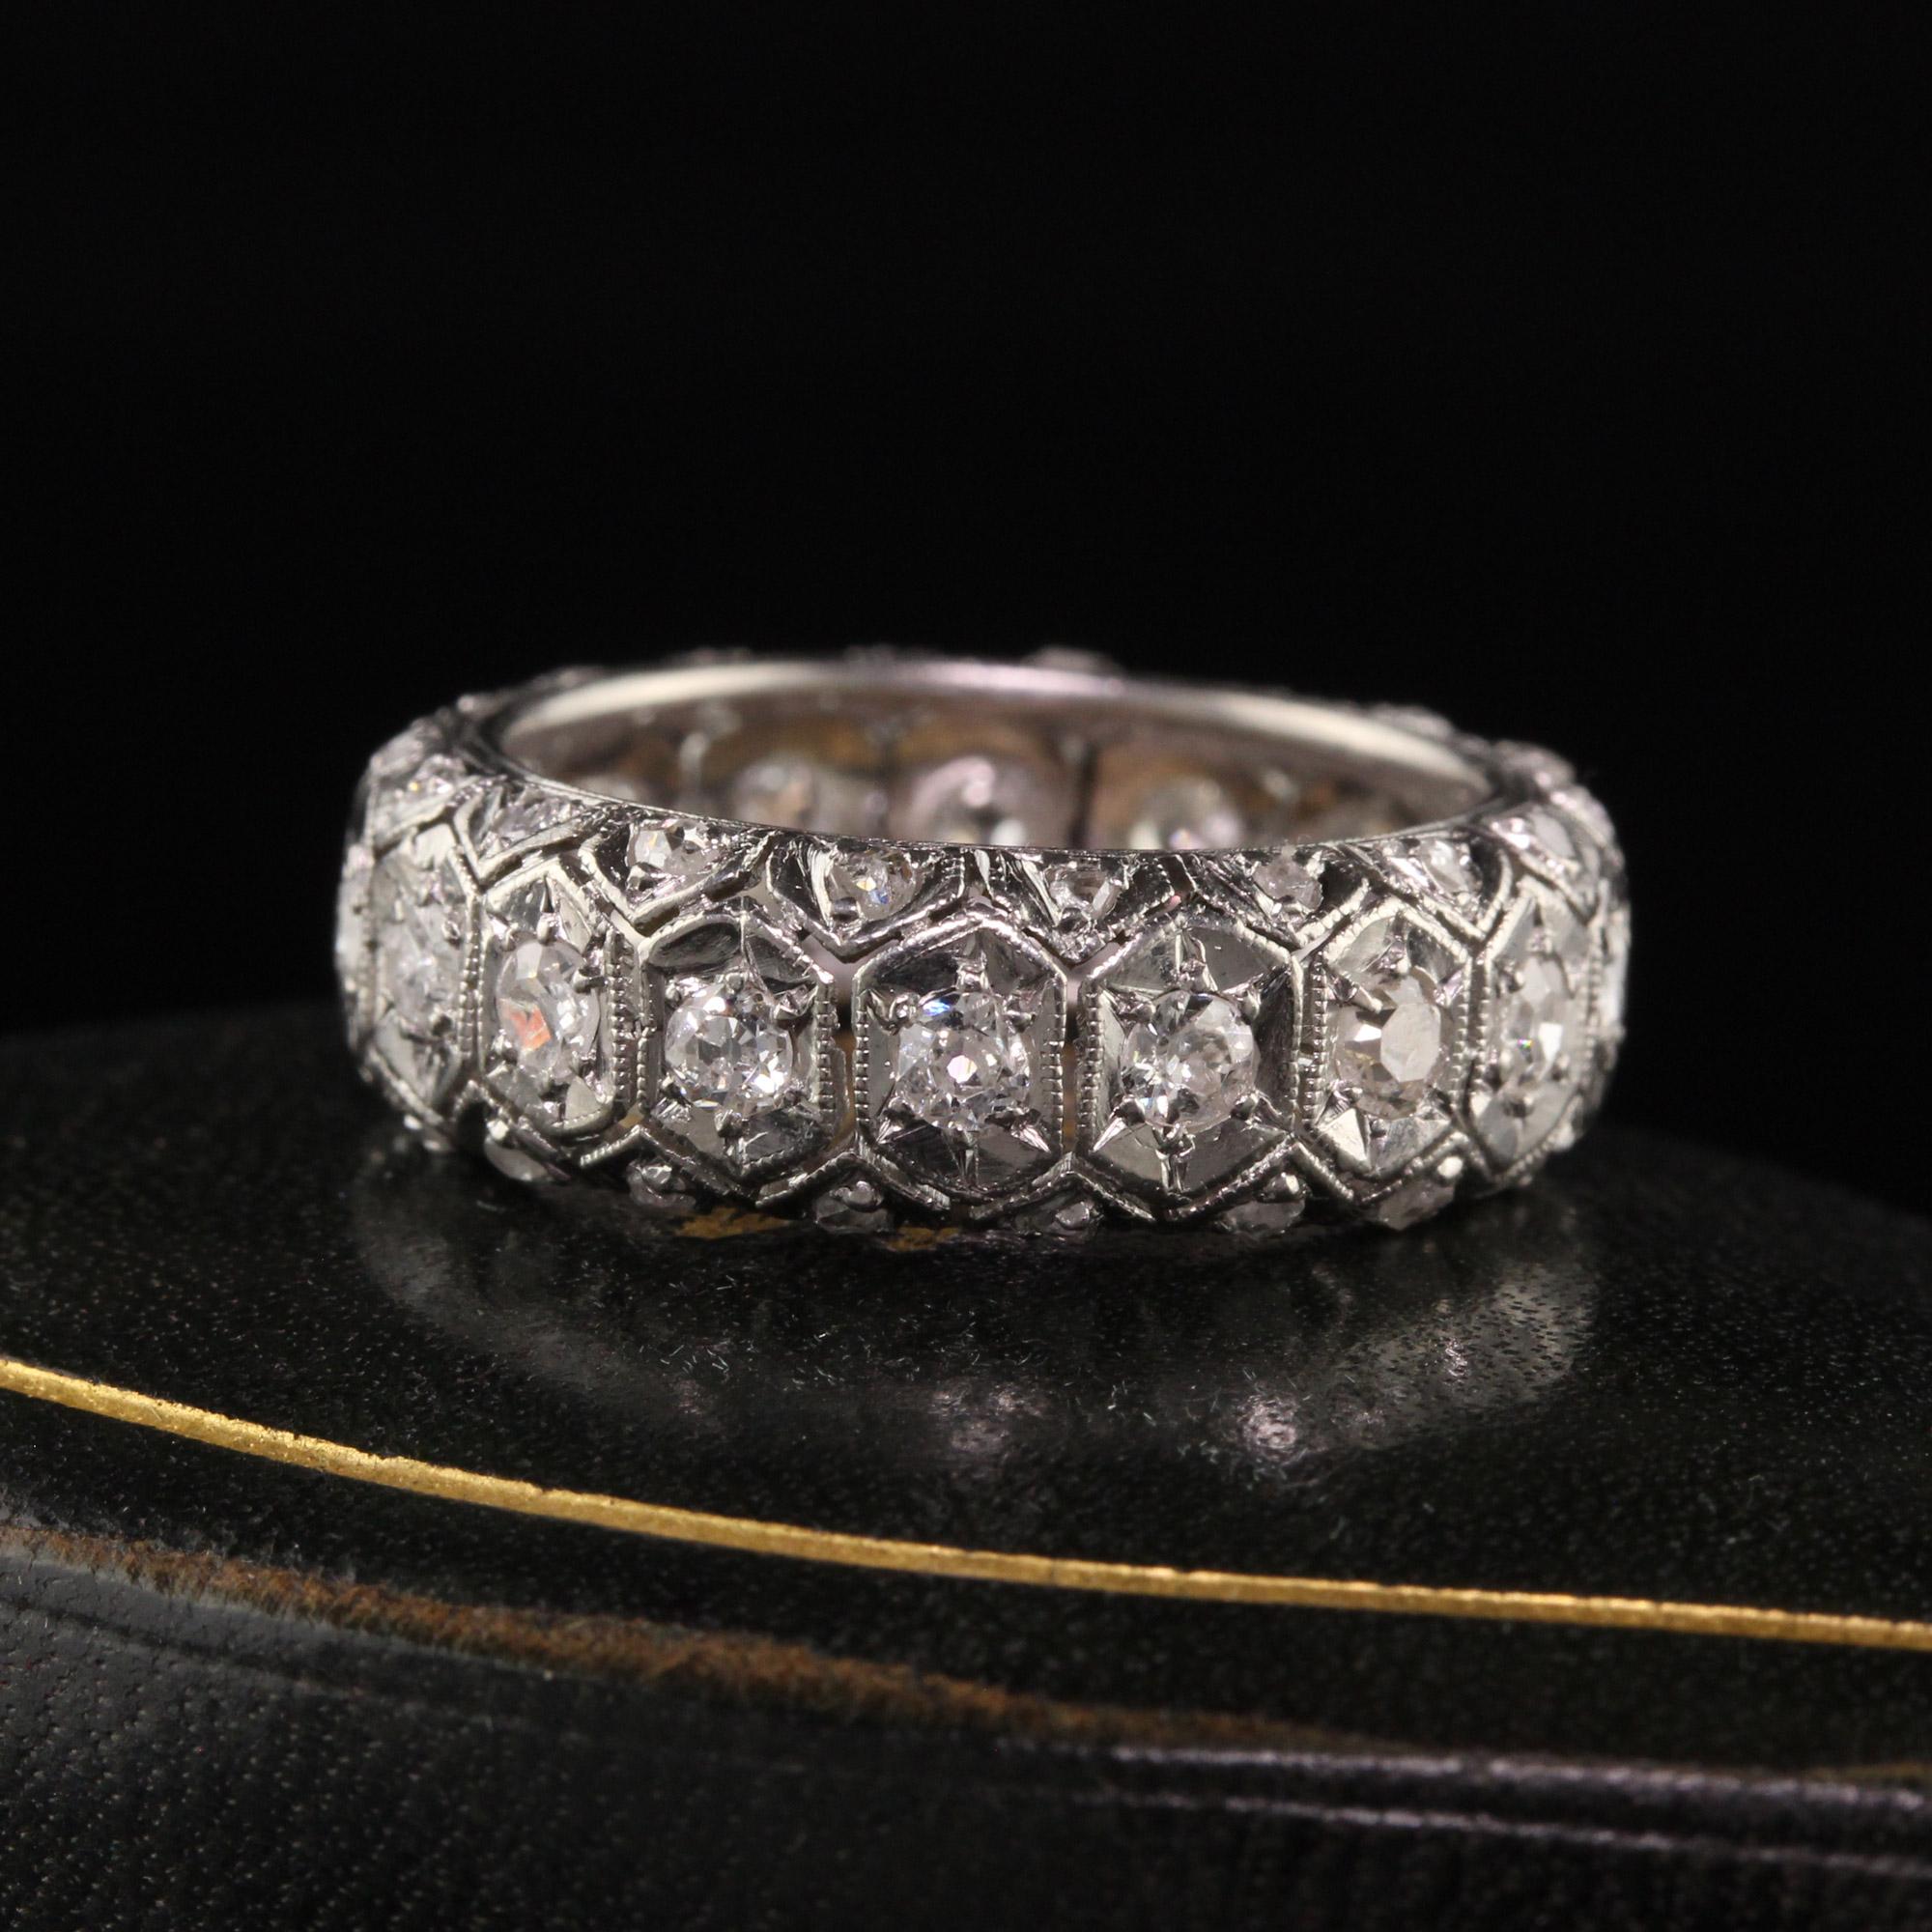 Beautiful Antique Art Deco Platinum Old Euro and Rose Cut Three Row Eternity Band. This incredible band is crafted in platinum. The band has old cut diamonds in the center with rose cut diamonds on the two outside rows. They are set in a gorgeous